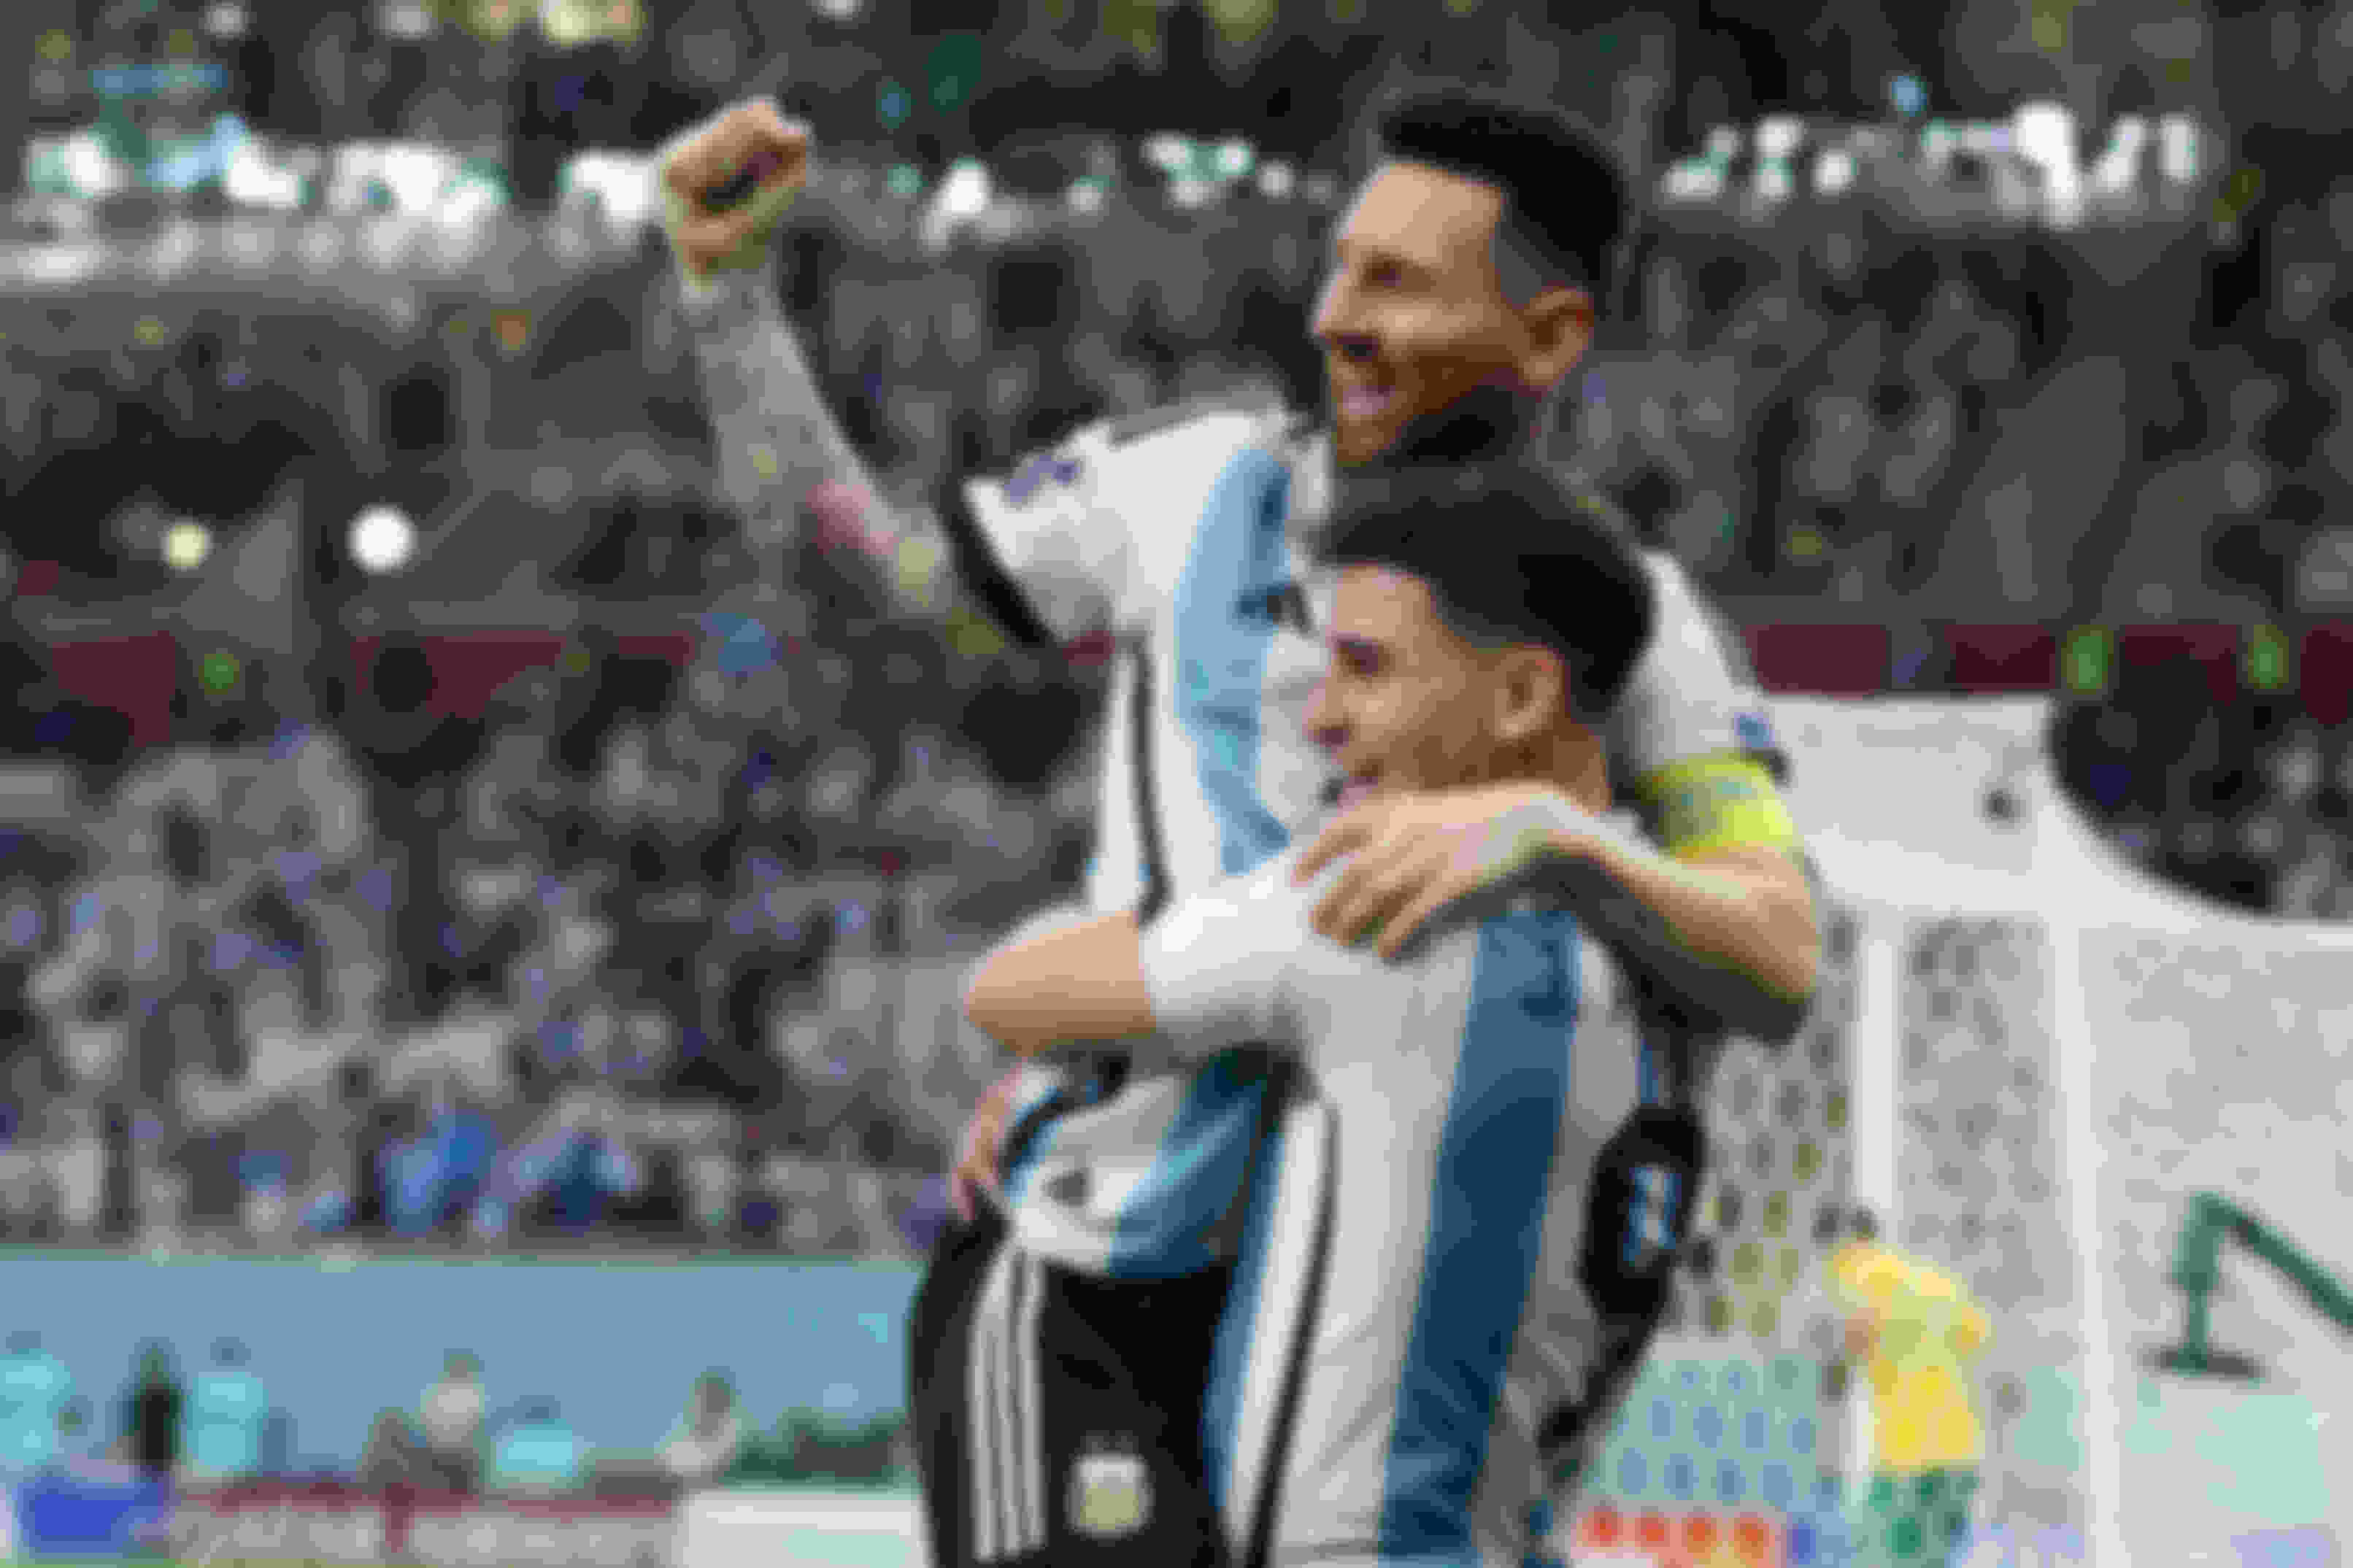 Lionel Messi and Julian Alvarex celebrate after Argentina score their second goal in their semi-final victory against Croatia